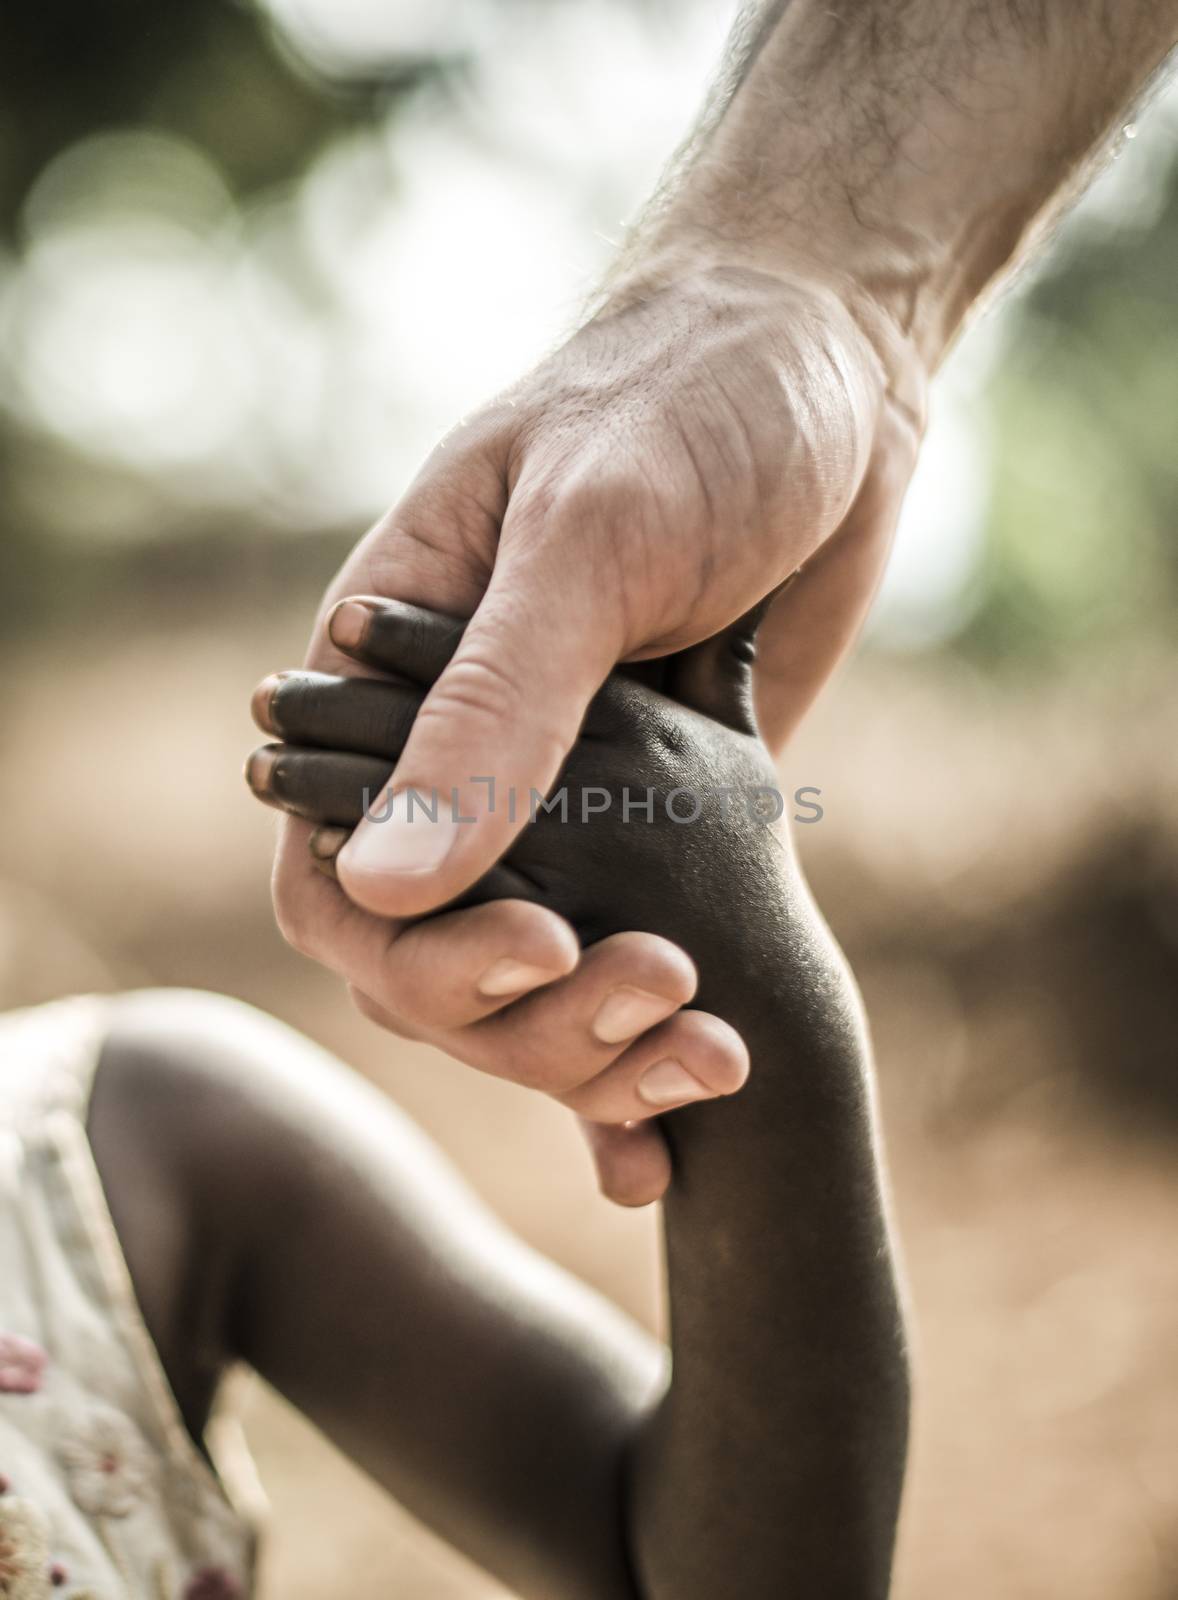 An african child holding a white males hand. The image represents the care and love in diversity and a cross cultural relationship